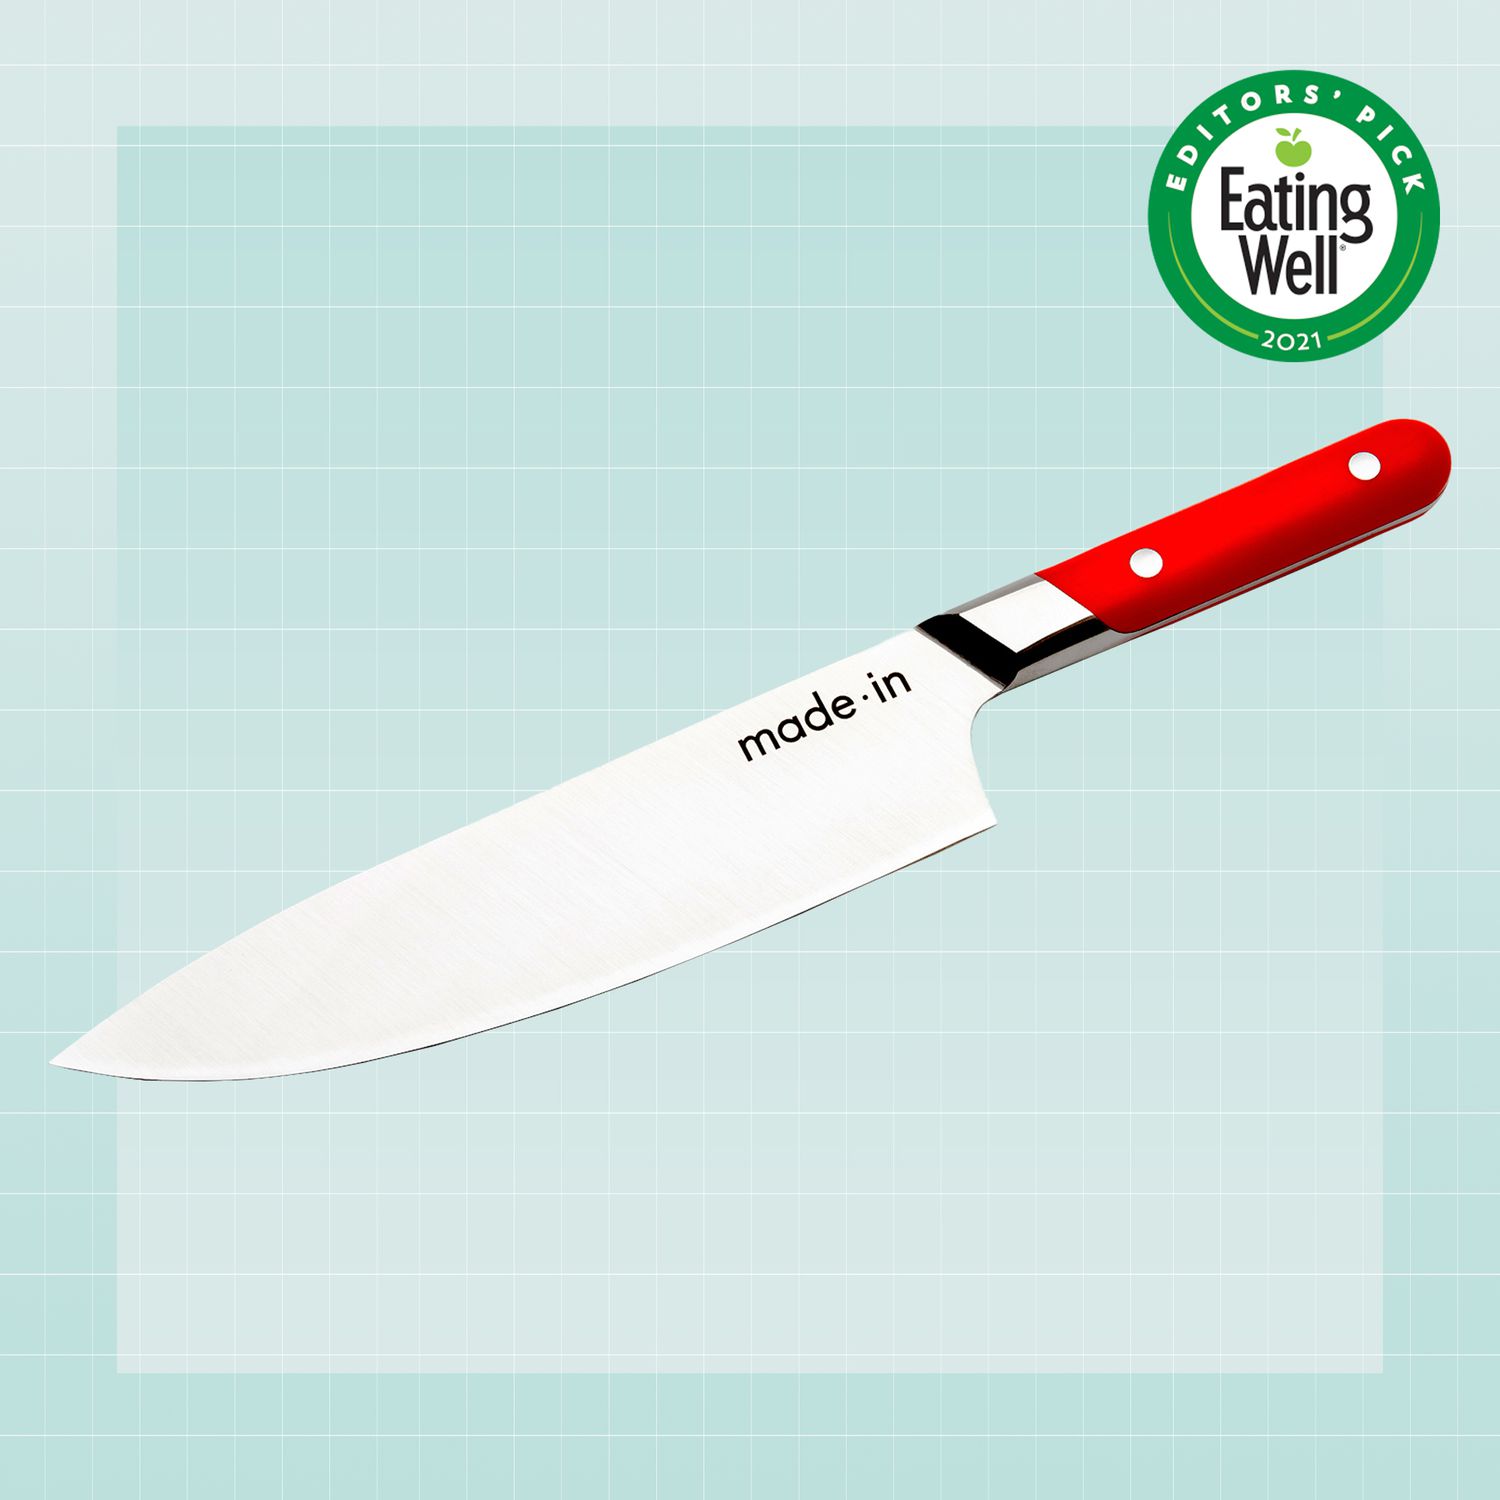 Made-In knife on a designed background